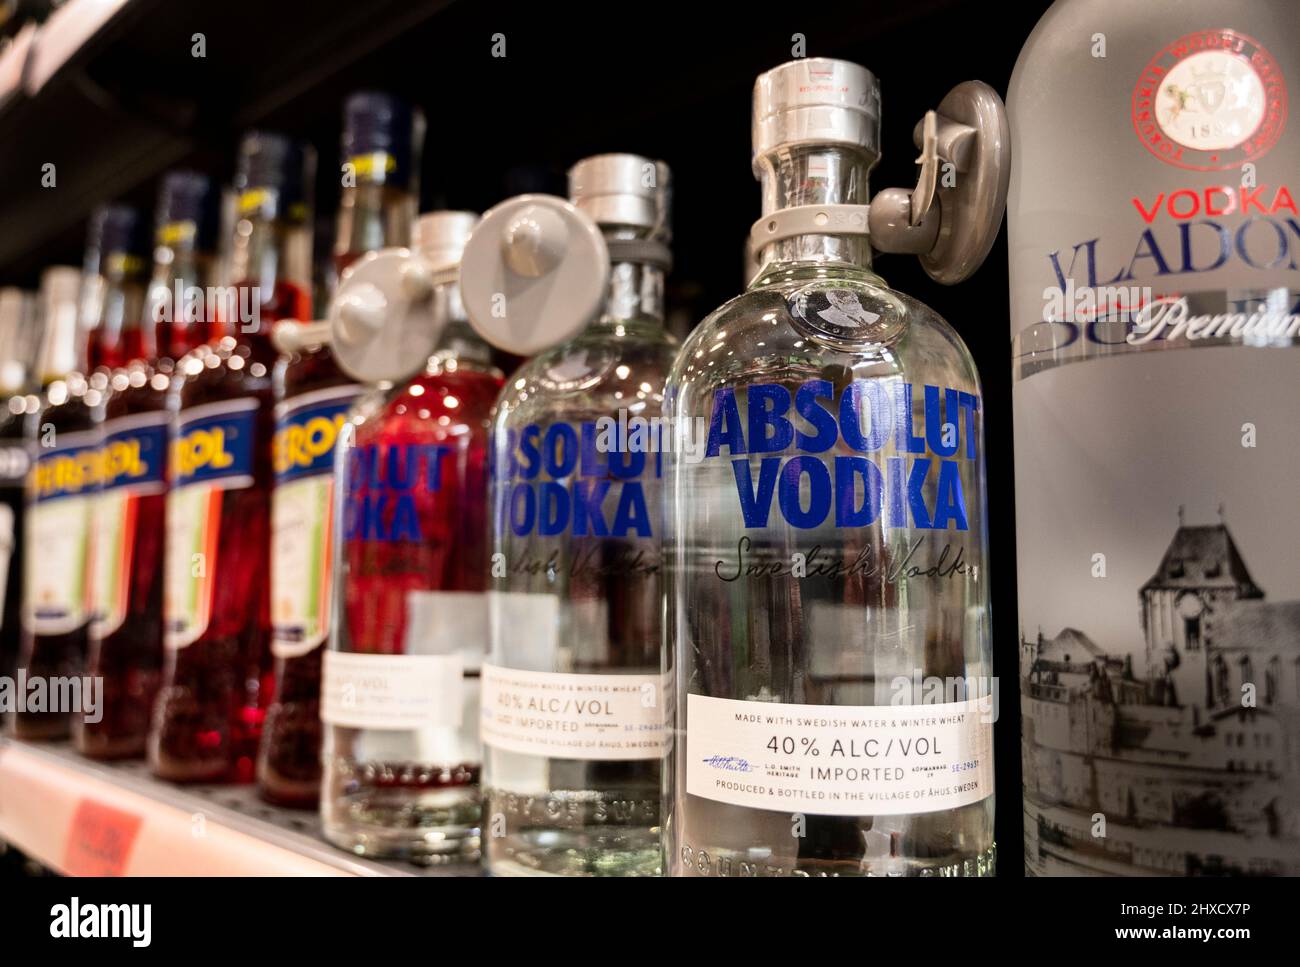 Alicante, Spain. 10th Mar, 2022. Bottles of Sweden vodka brand, Absolut  Vodka, seen for sale at a supermarket in Spain. Credit: SOPA Images  Limited/Alamy Live News Stock Photo - Alamy